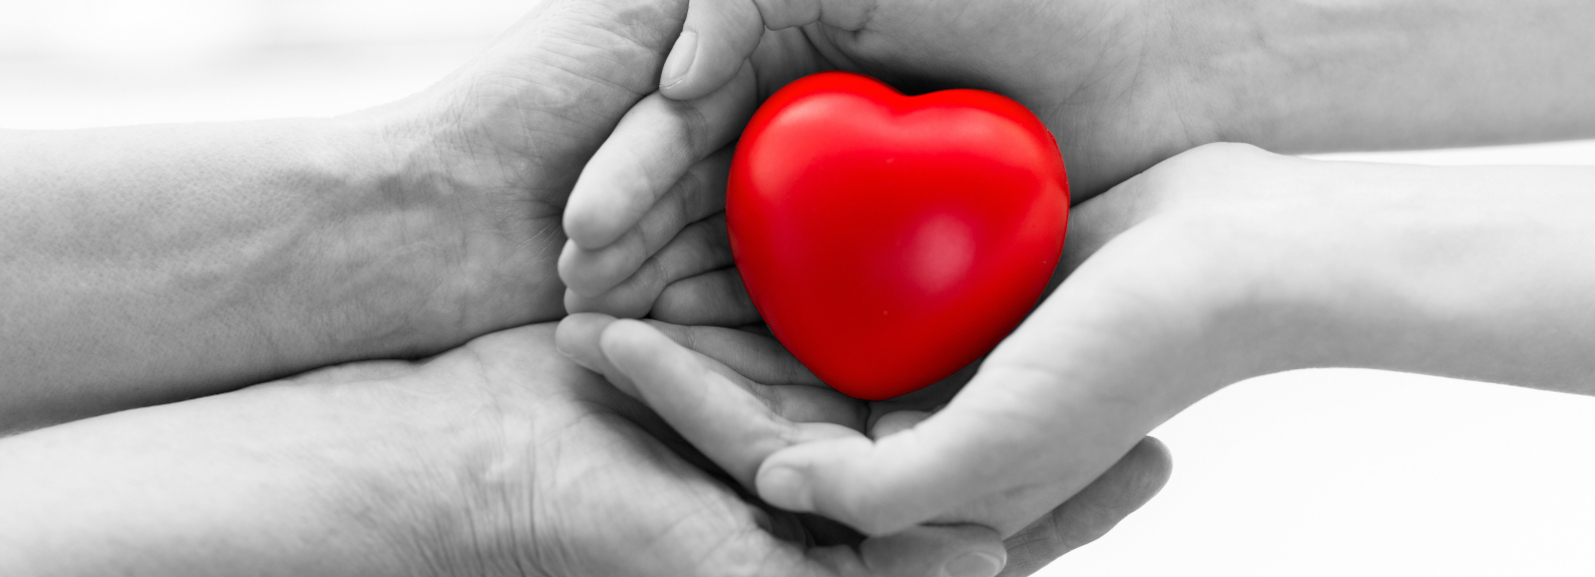 Black and white image show two hands holding a red heart